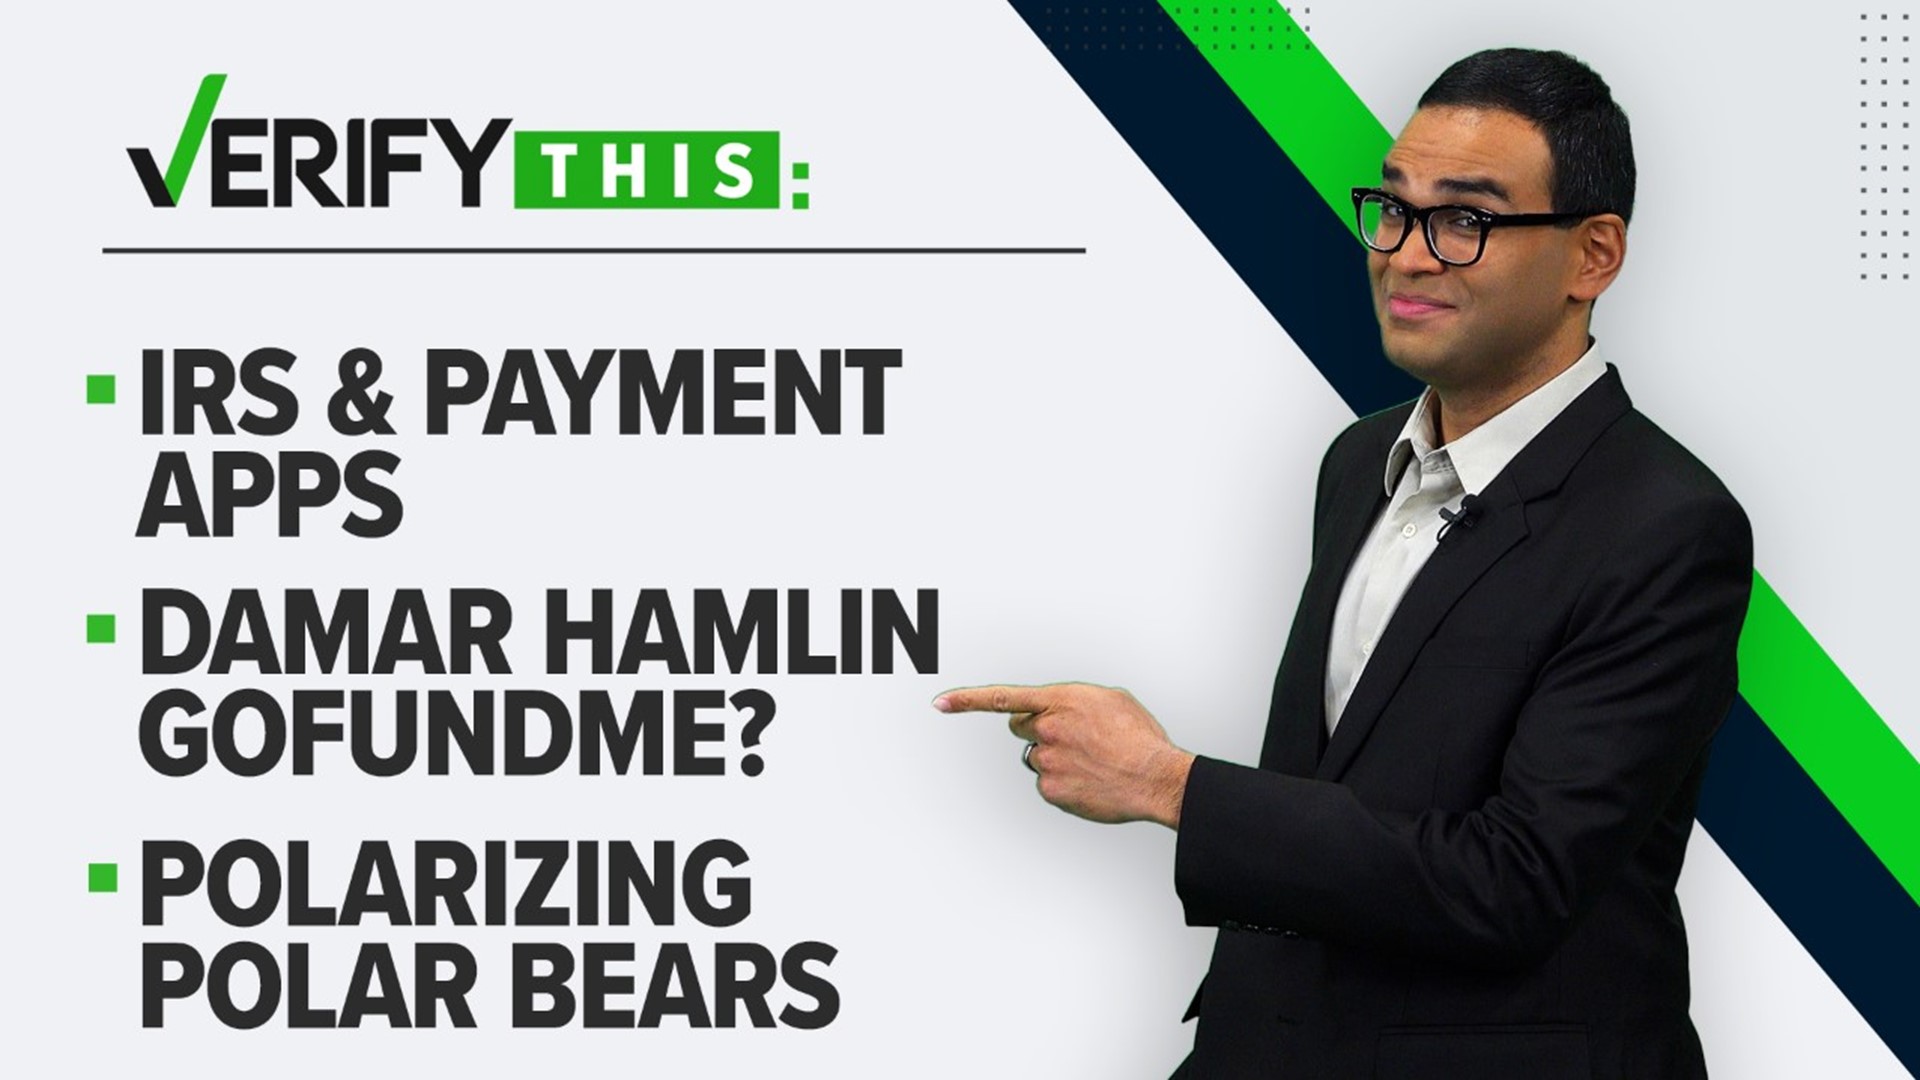 Verifying answers to your questions about the IRS and payment apps, Damar Hamilin's GoFundMe, polarizing polar bears and more.